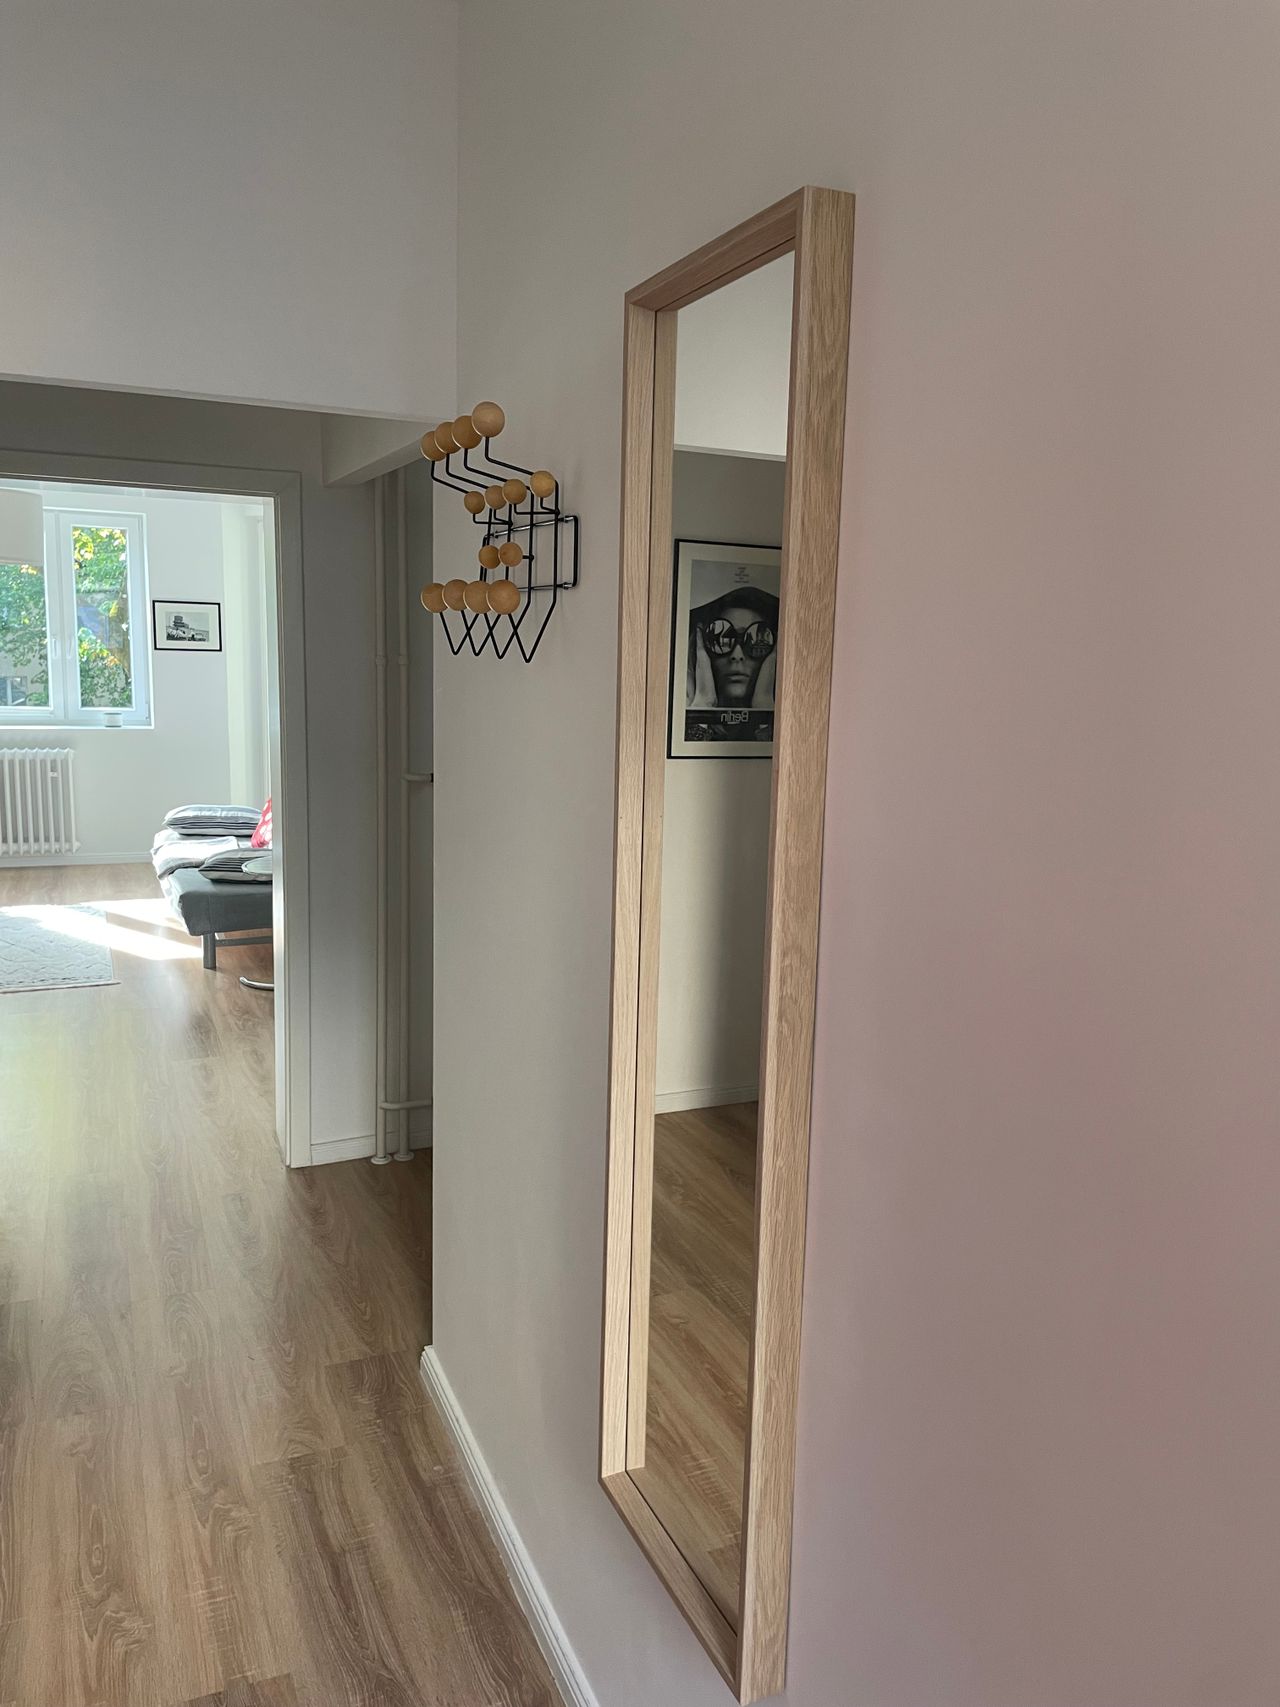 Sunny studio in the heart of the City-West close by KaDeWe and Viktoria Luise Platz